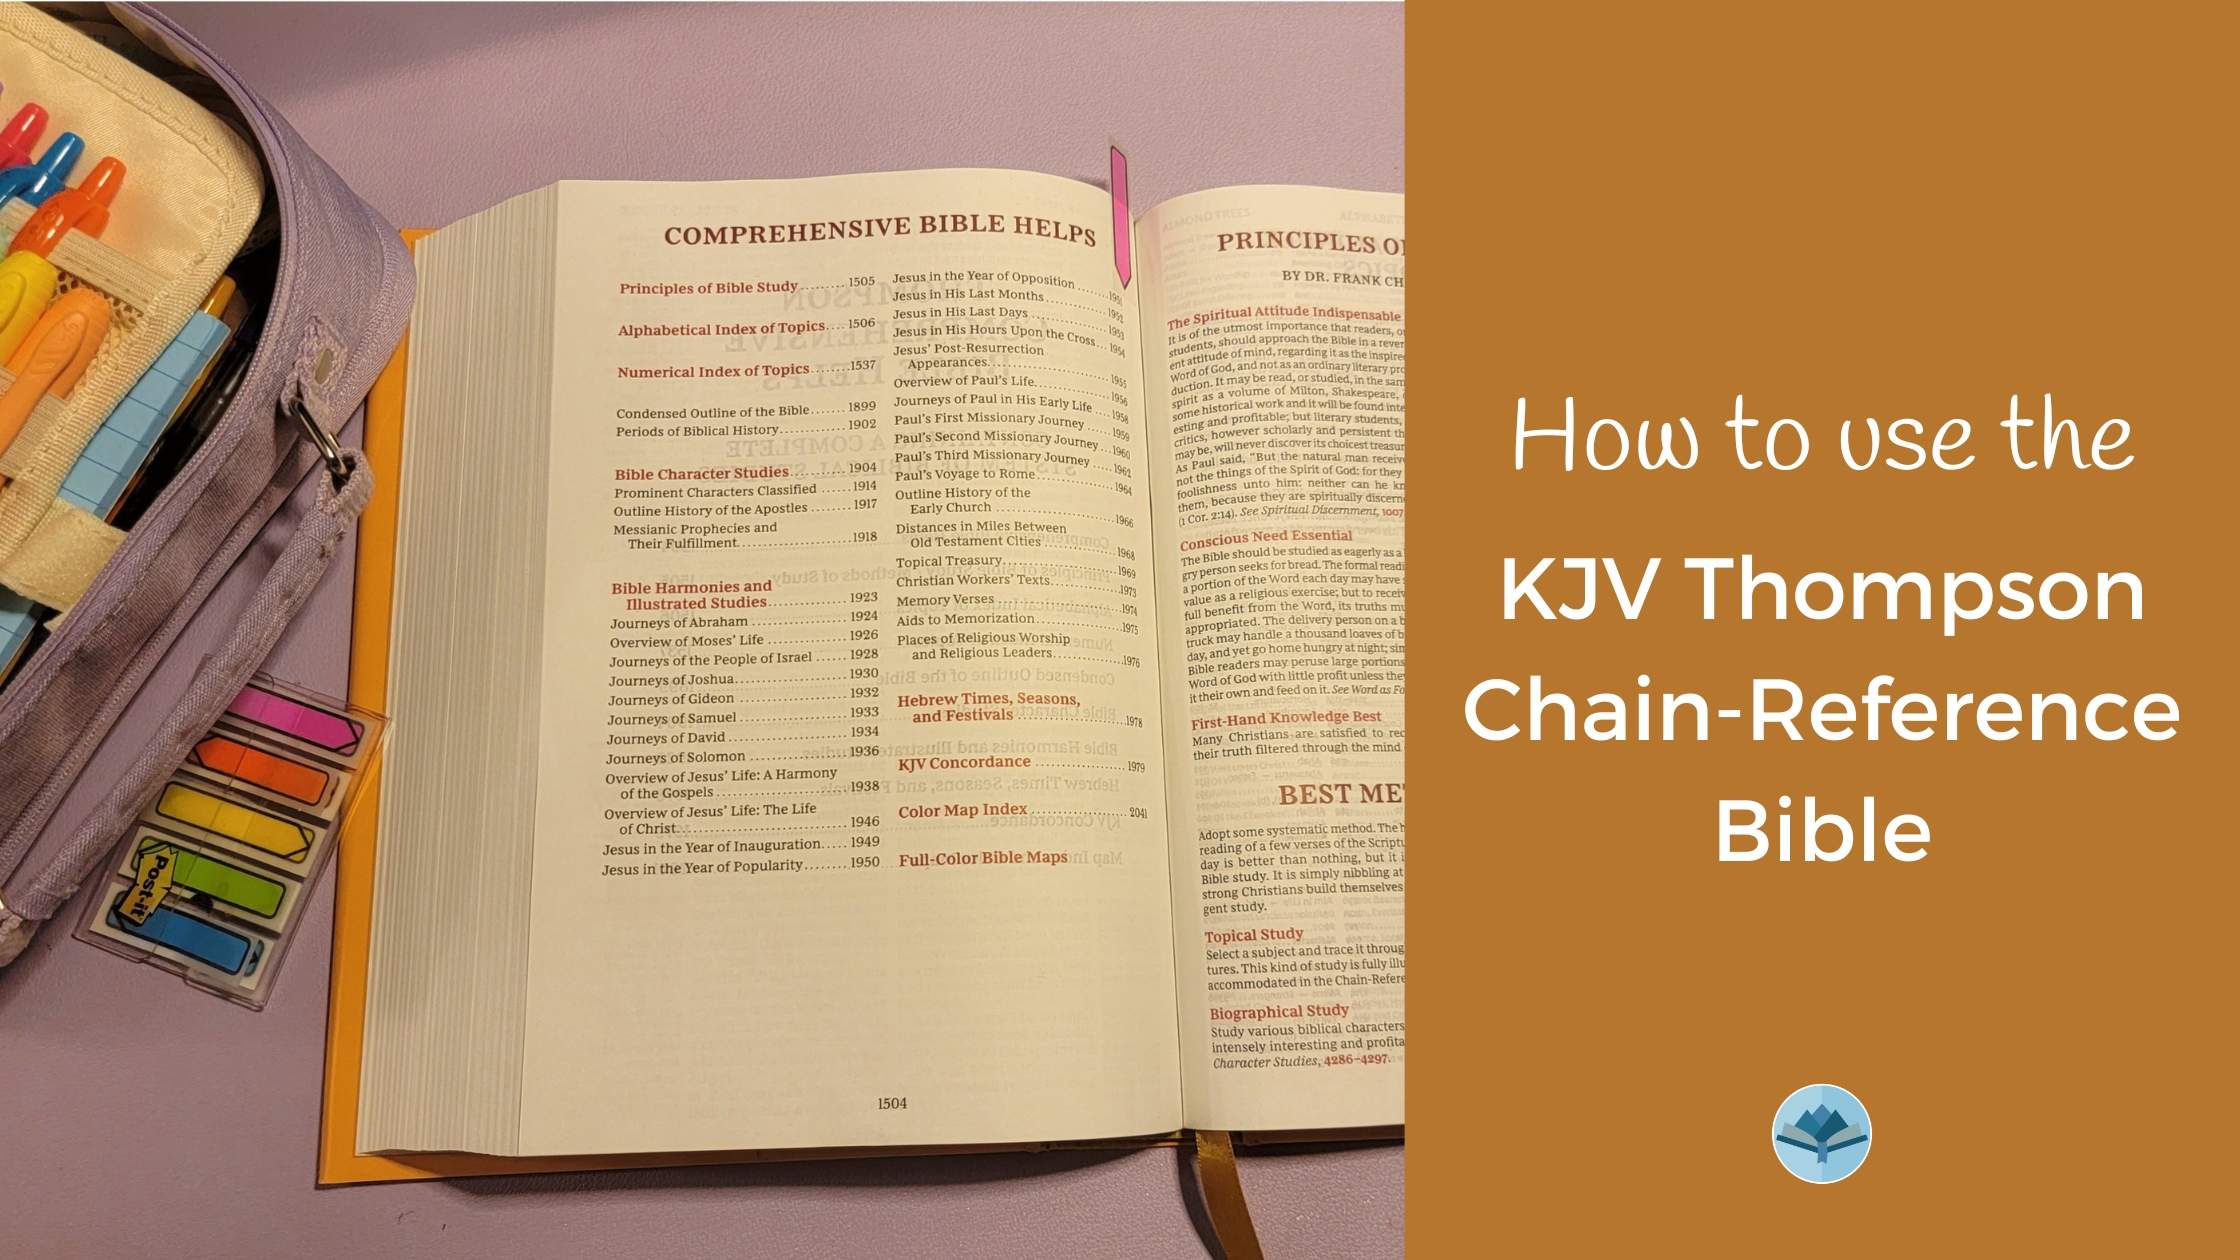 How to use the Thompson Chain-Reference Bible